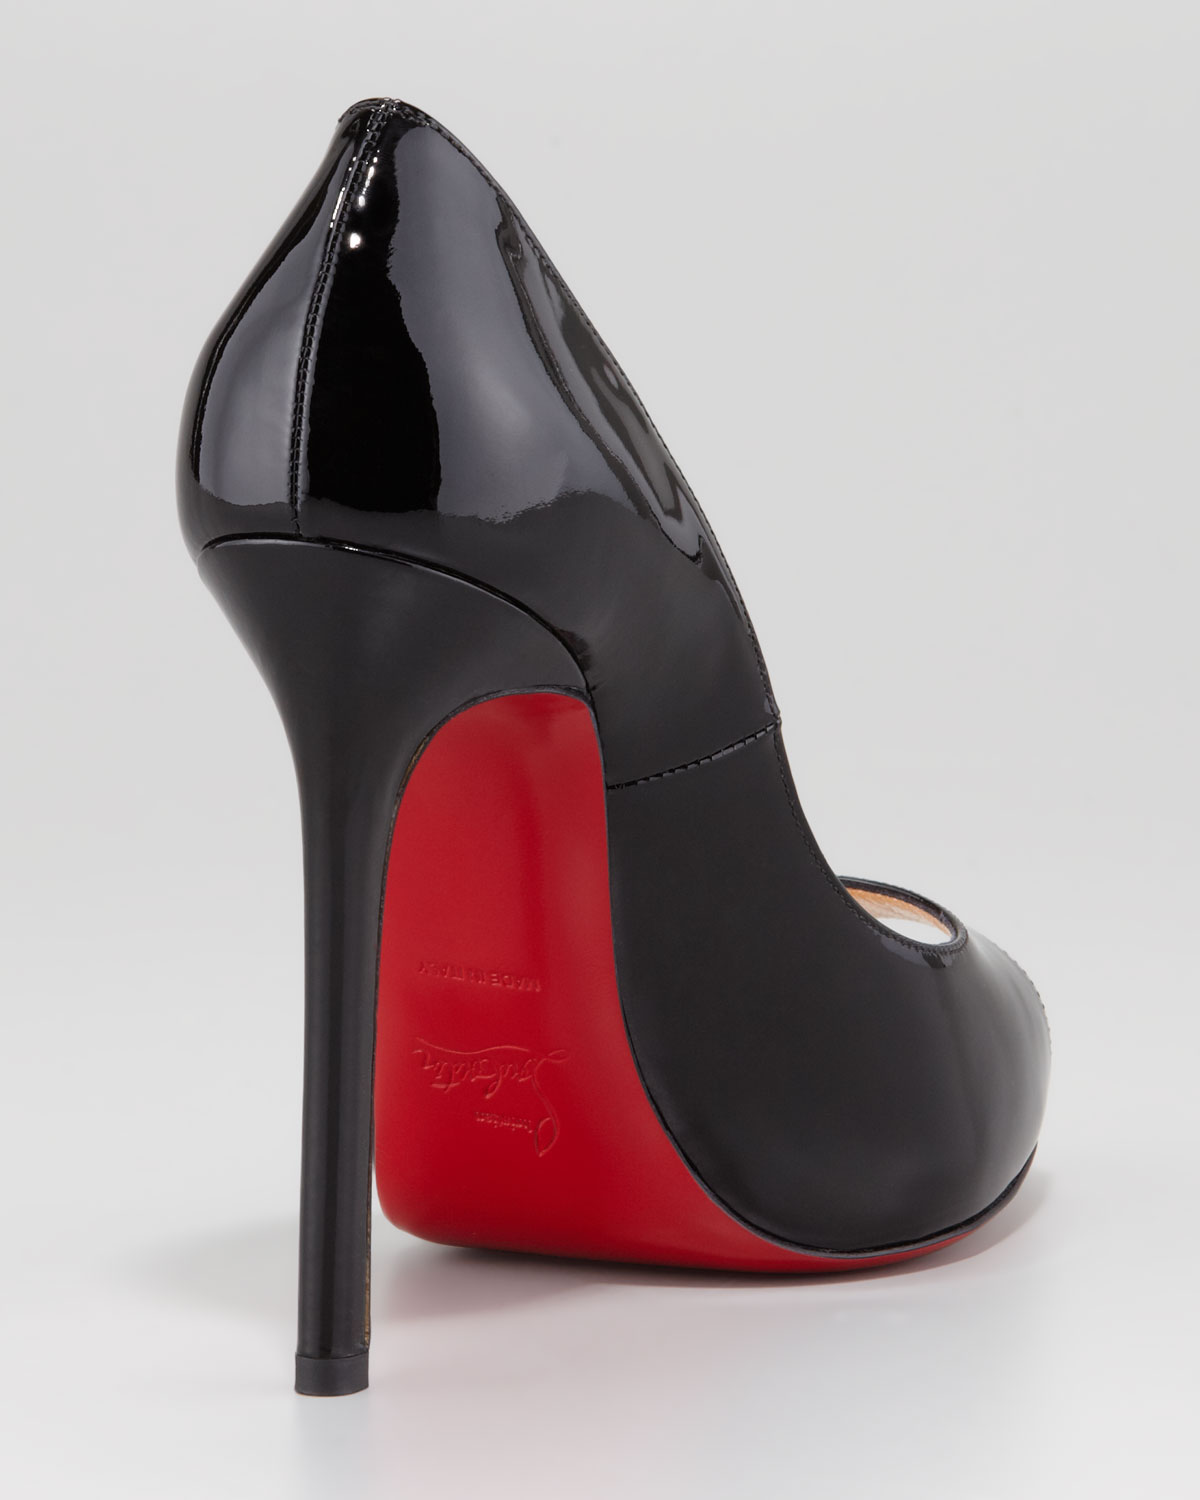 manolo shoes red soles